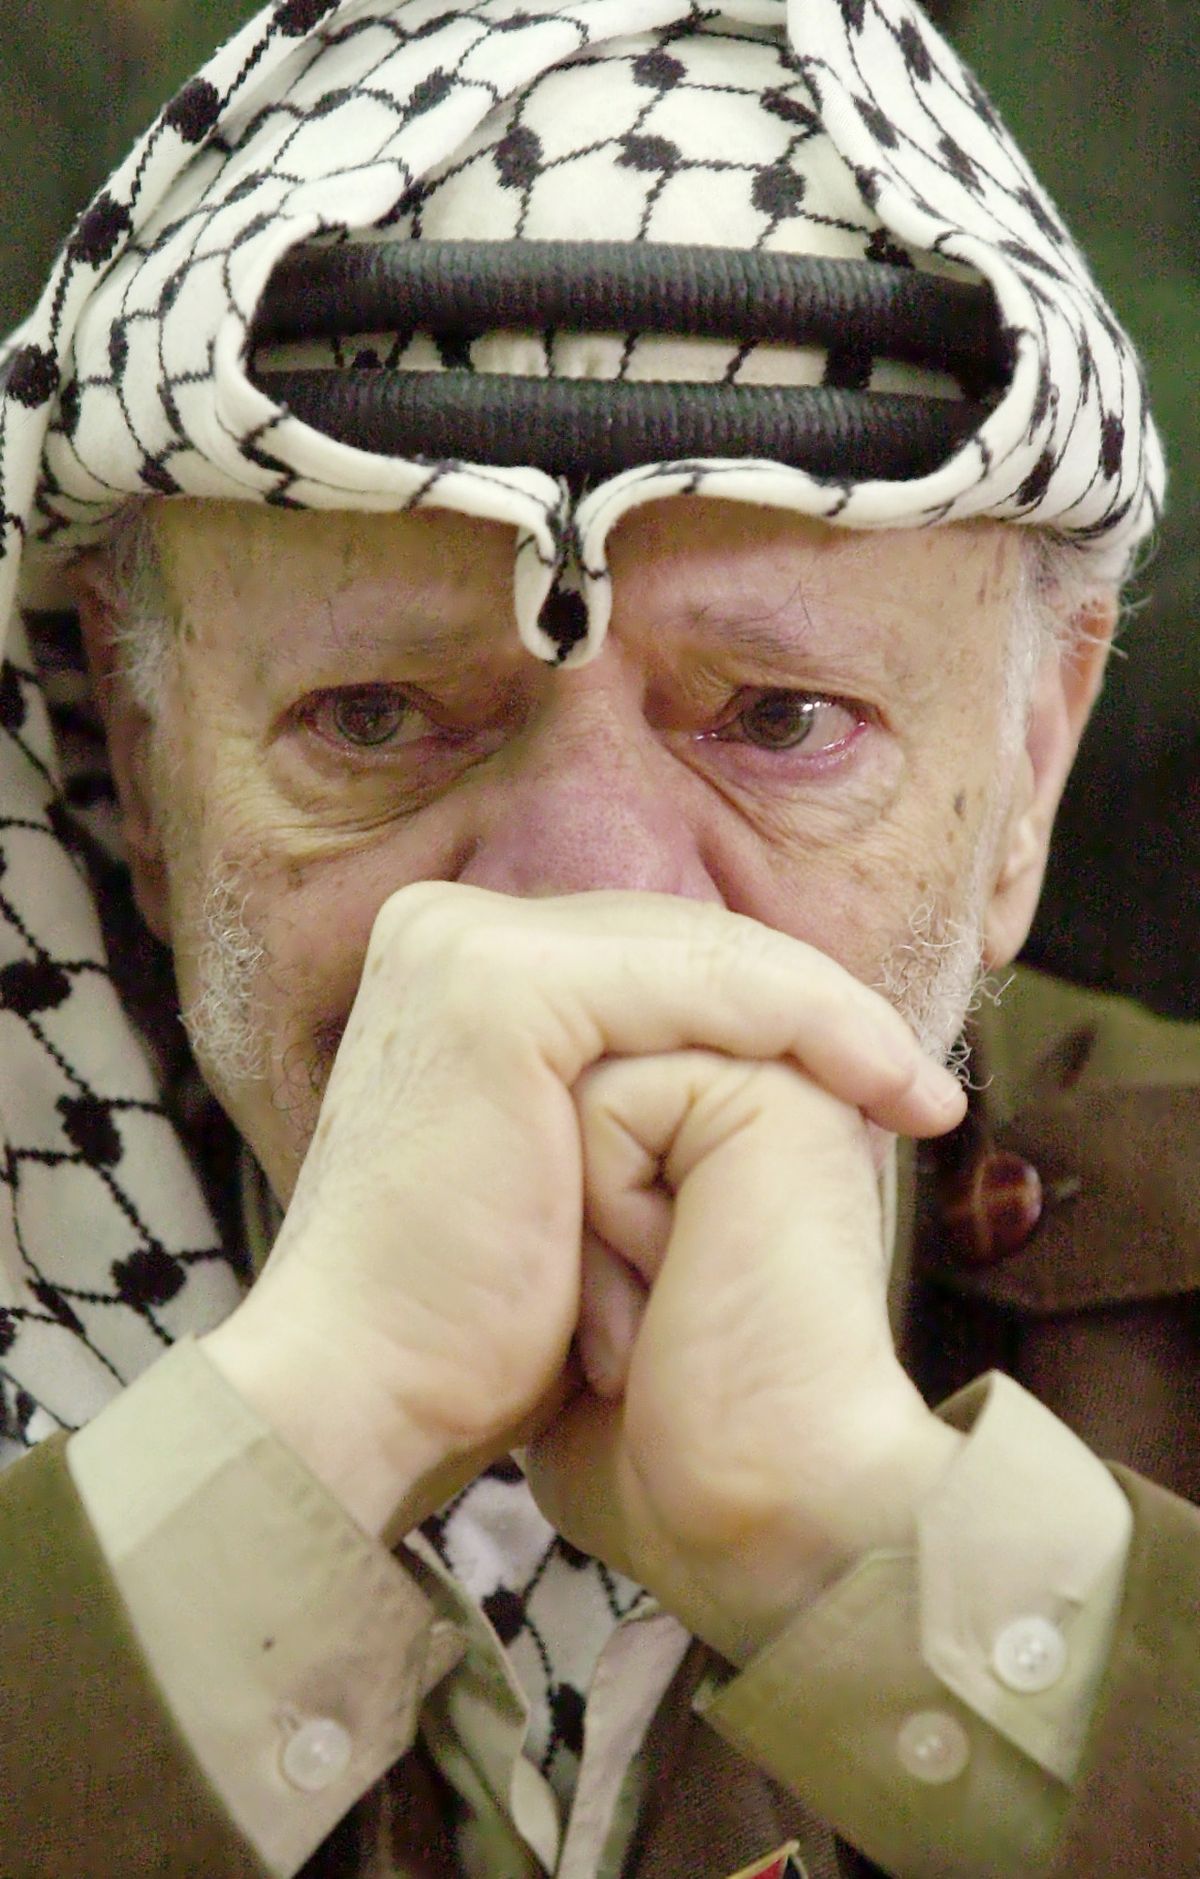 FILE - In this Aug. 13, 2003 file photo, Palestinian leader Yasser Arafat, with tears in his eyes, after he was informed of the death of his sister Yousra Abdel Raouf Al Kidwah at his compound in the West Bank town of Ramallah. French prosecutors opened a murder inquiry into the death of Yasser Arafat on Tuesday, Aug. 28, 2012, judicial officials told a French new agency, after his widow and a TV investigation raised new questions about whether the Palestinian leader was poisoned. (Nasser Nasser / Associated Press)